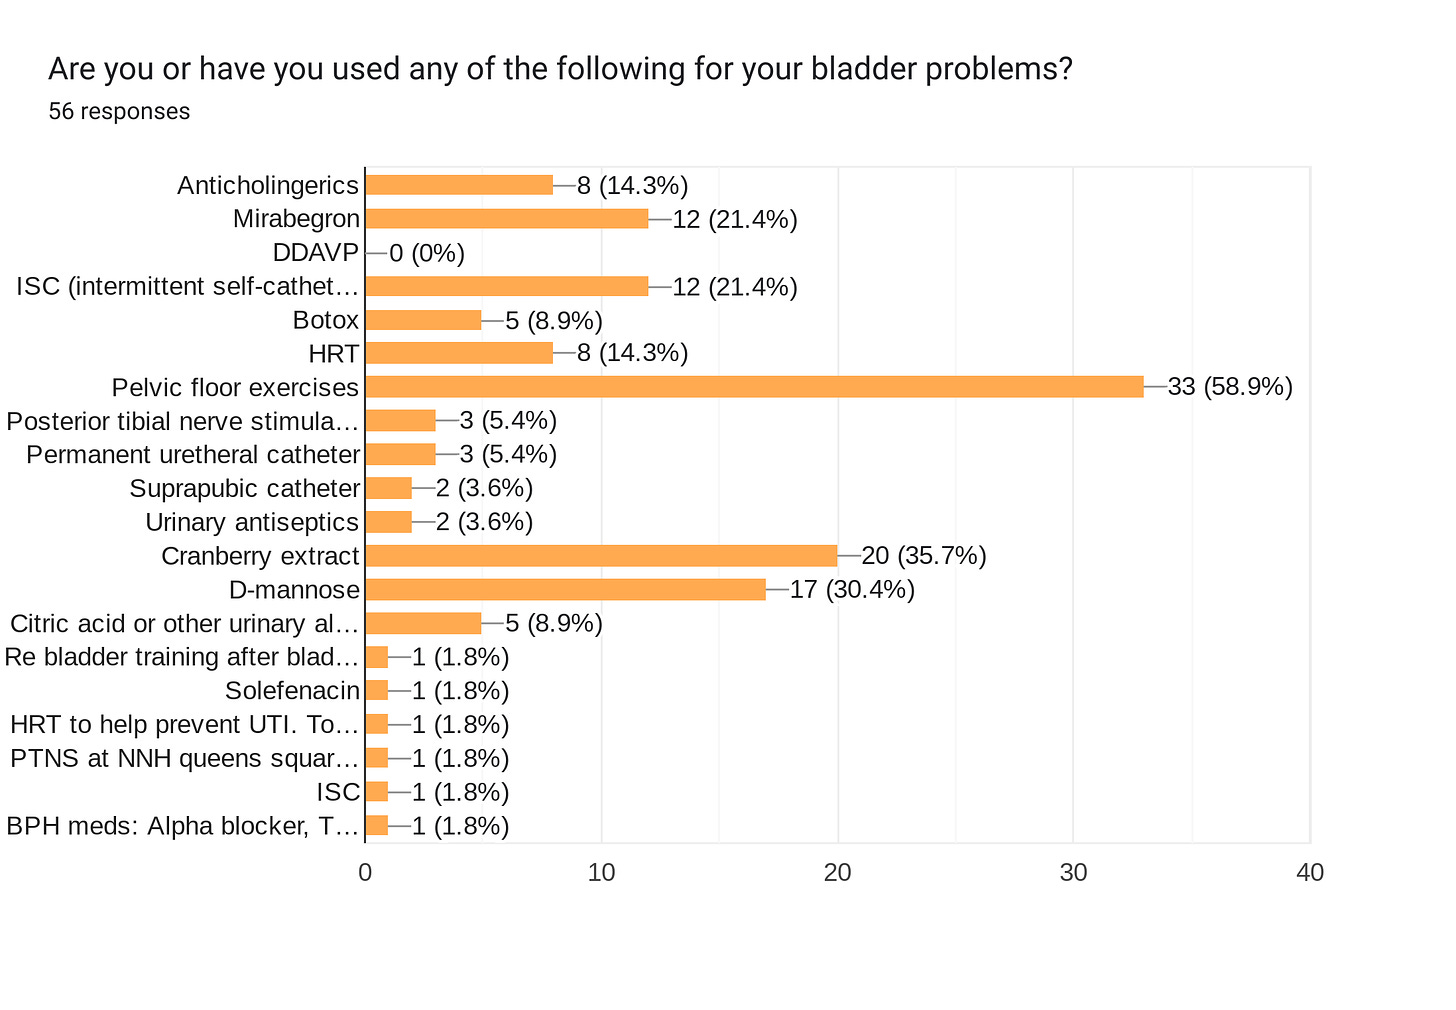 Forms response chart. Question title: Are you or have you used any of the following for your bladder problems?. Number of responses: 56 responses.